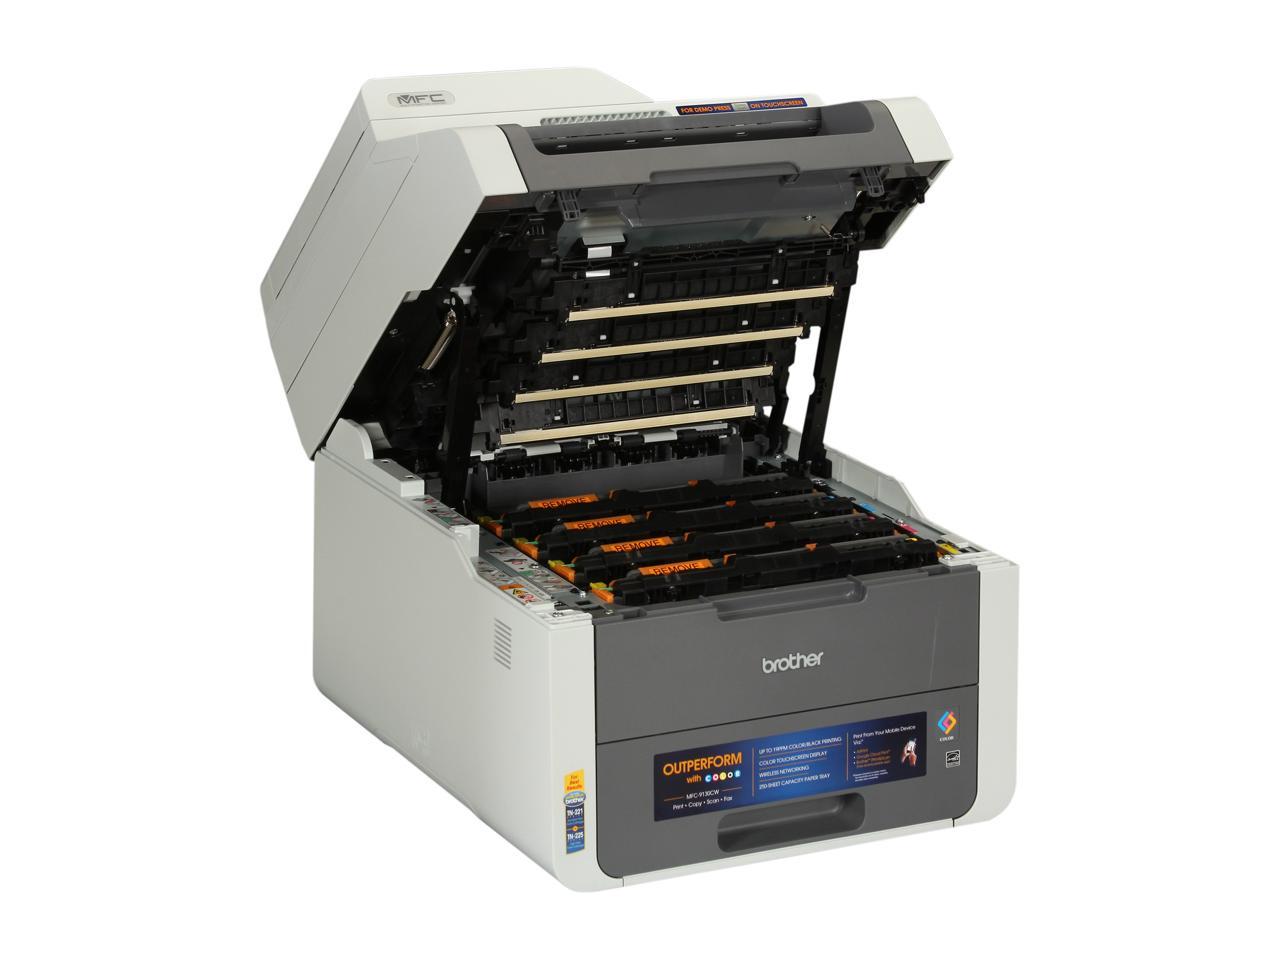 Brother Mfc 9130cw Digital Color All In One Laser Printer With Wireless Networking Neweggca 2601